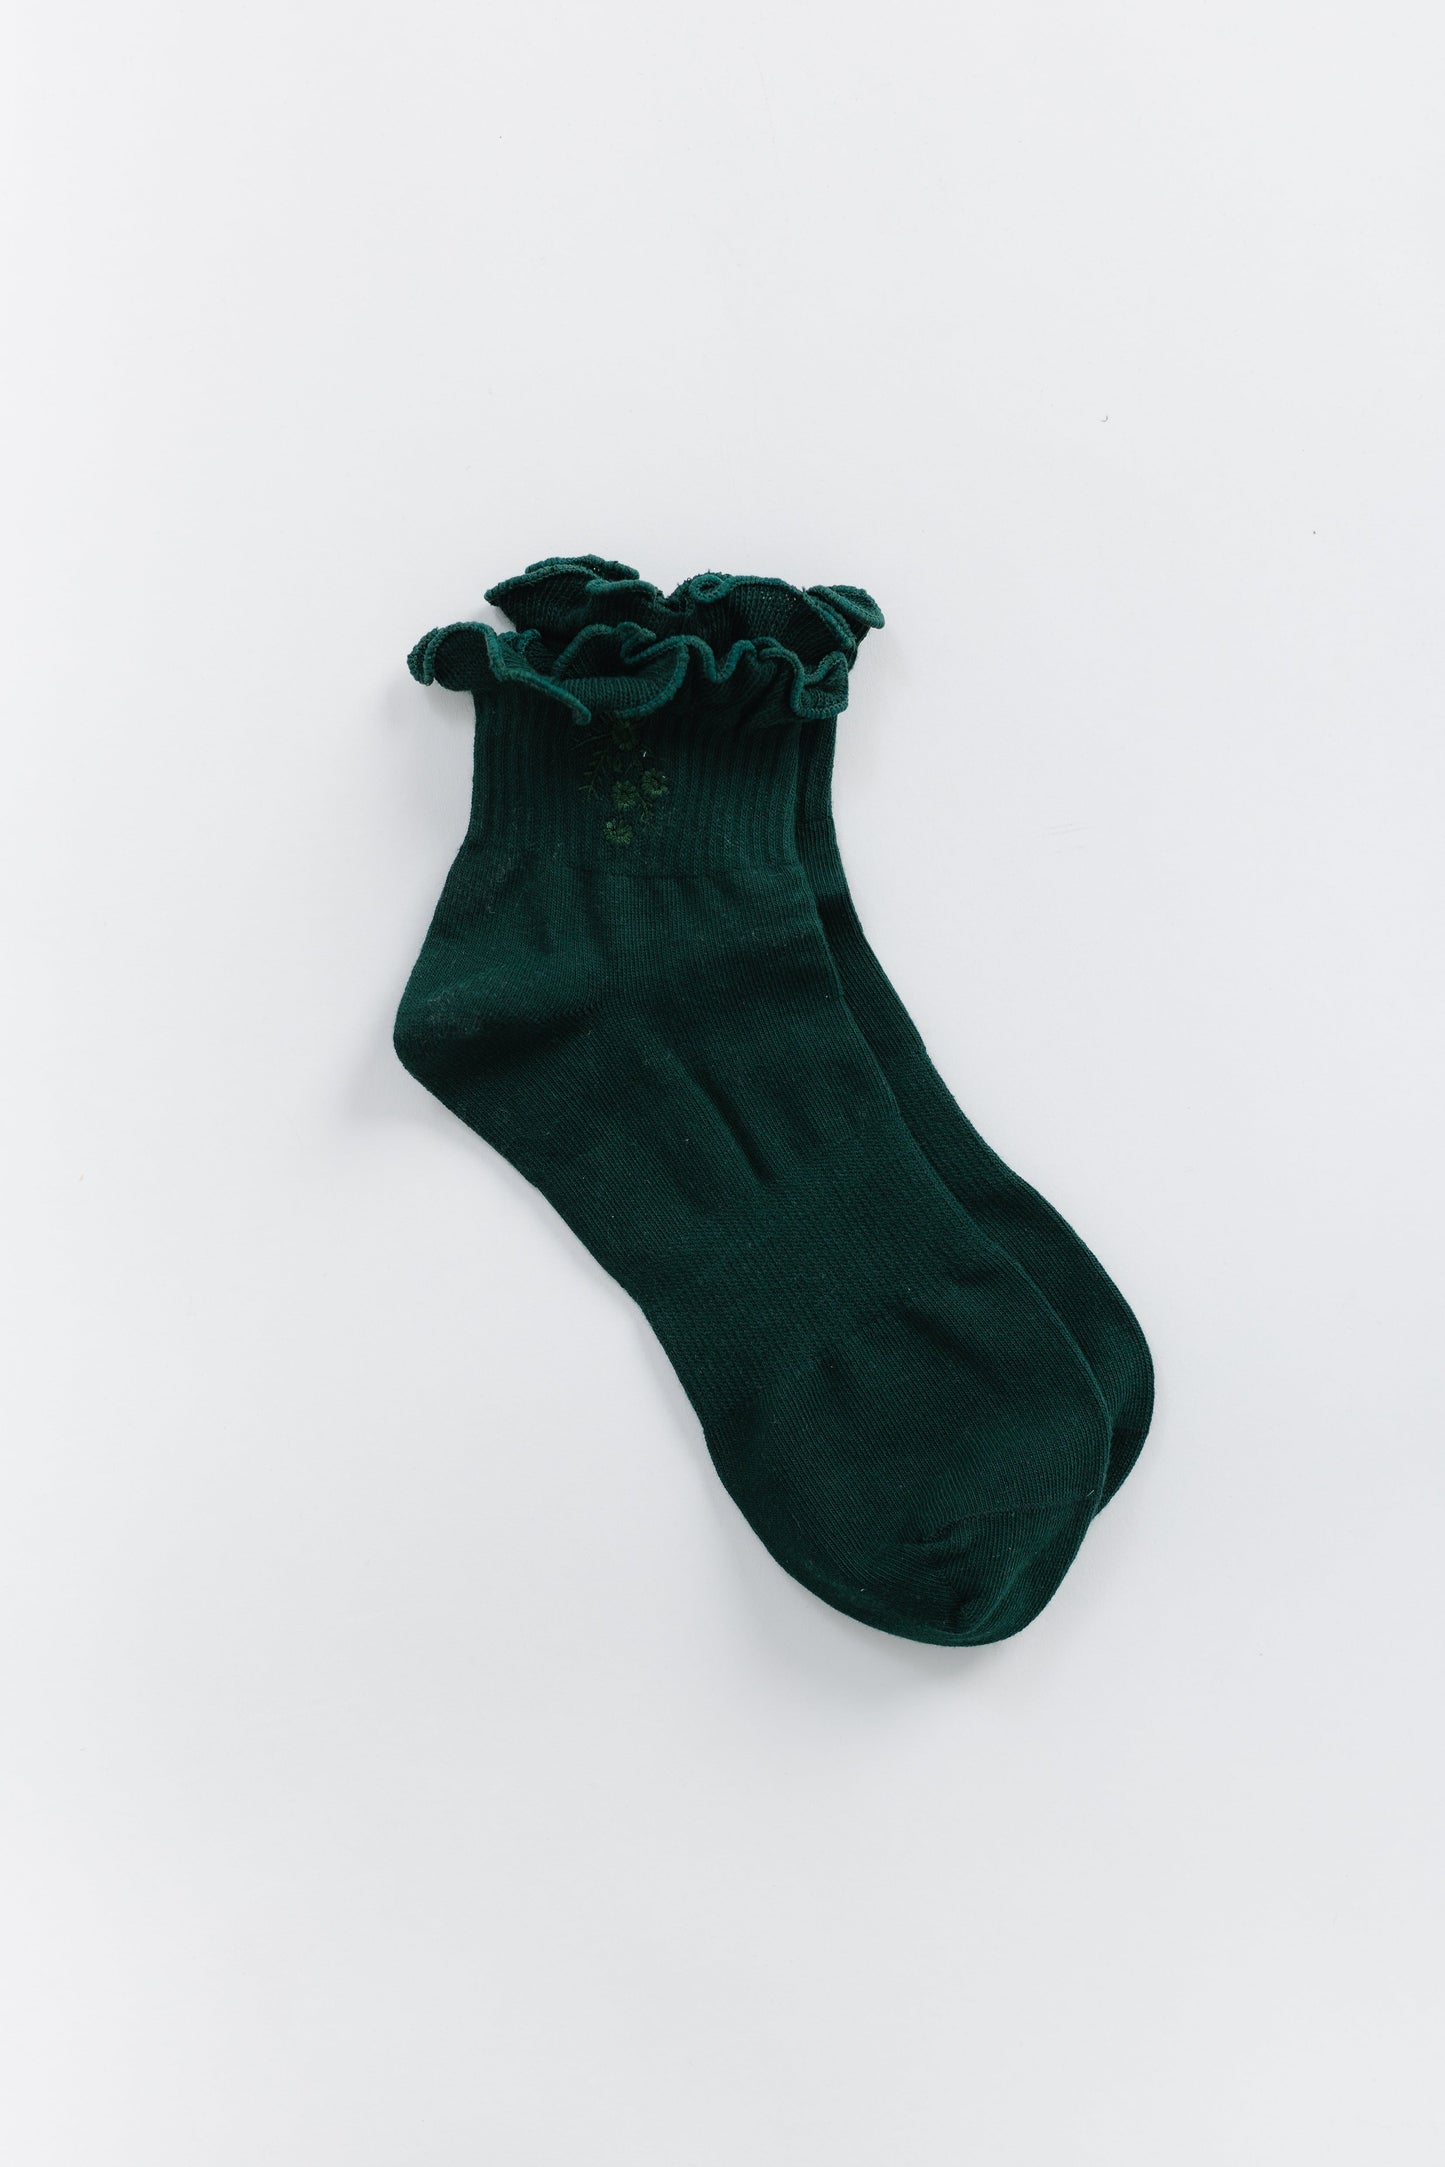 Cove Embroidered Ruffle Quarter WOMEN'S SOCKS Cove Accessories Forest Green OS 